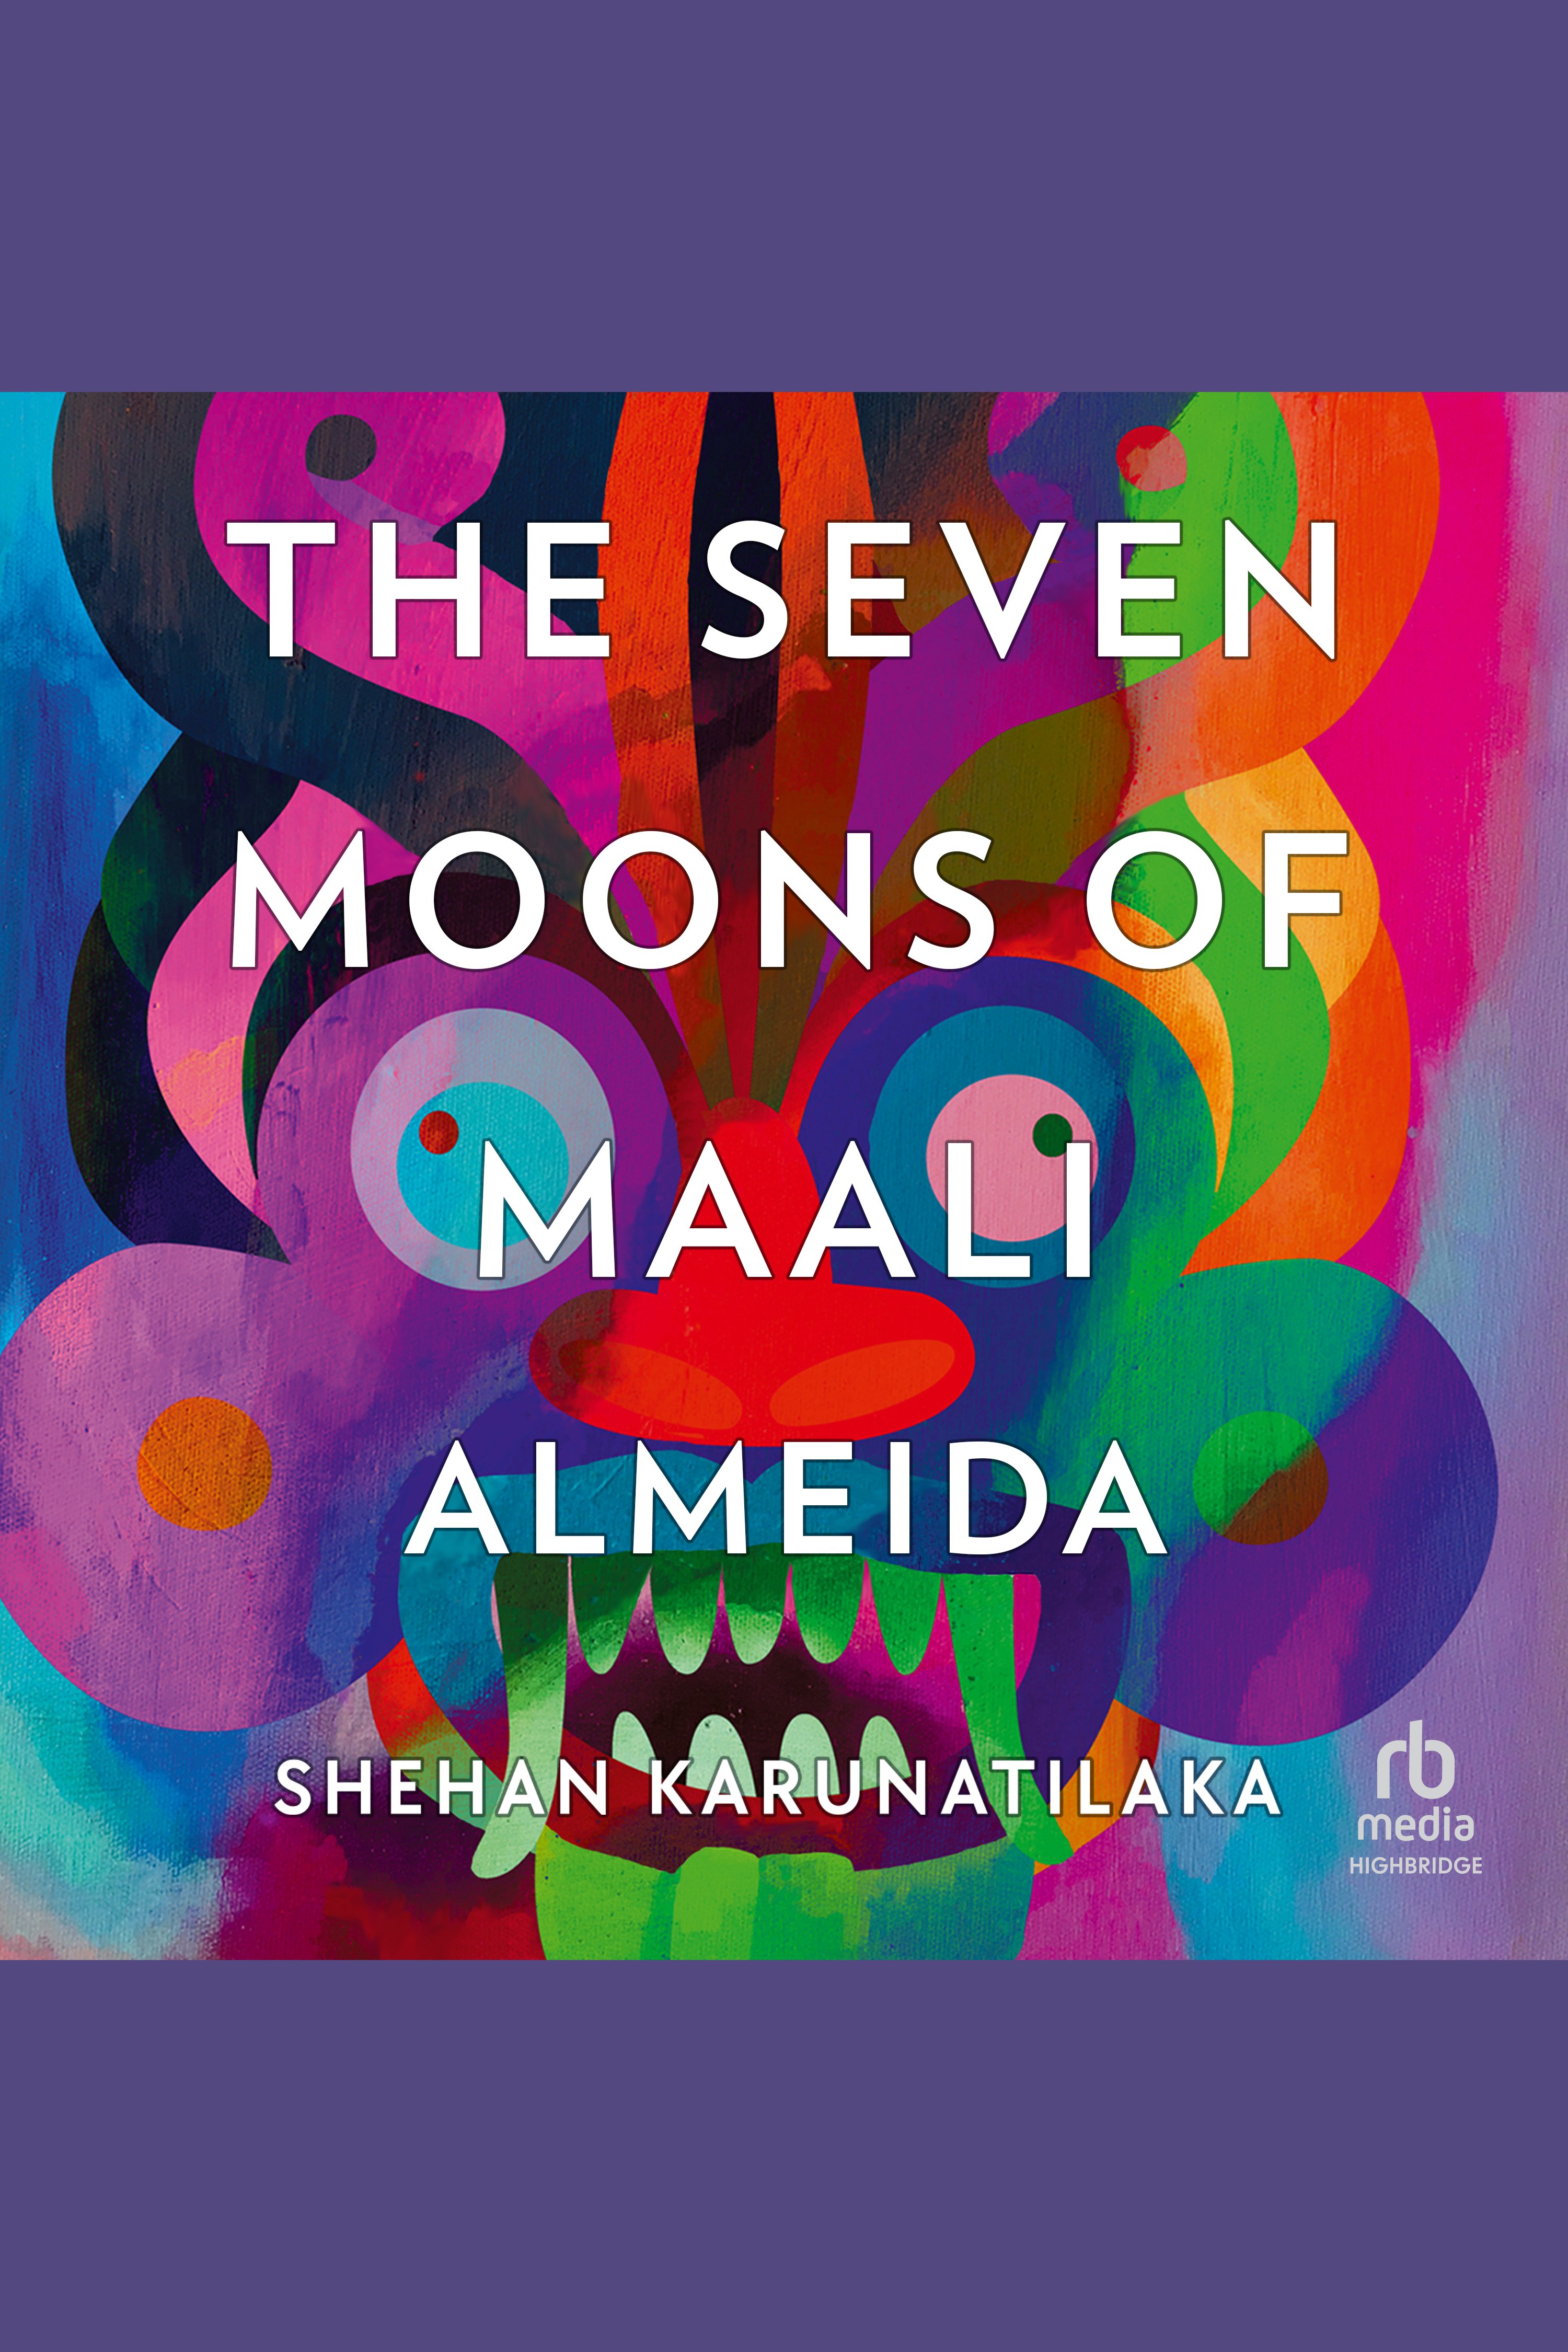 The Seven Moons of Maali Almeida cover image